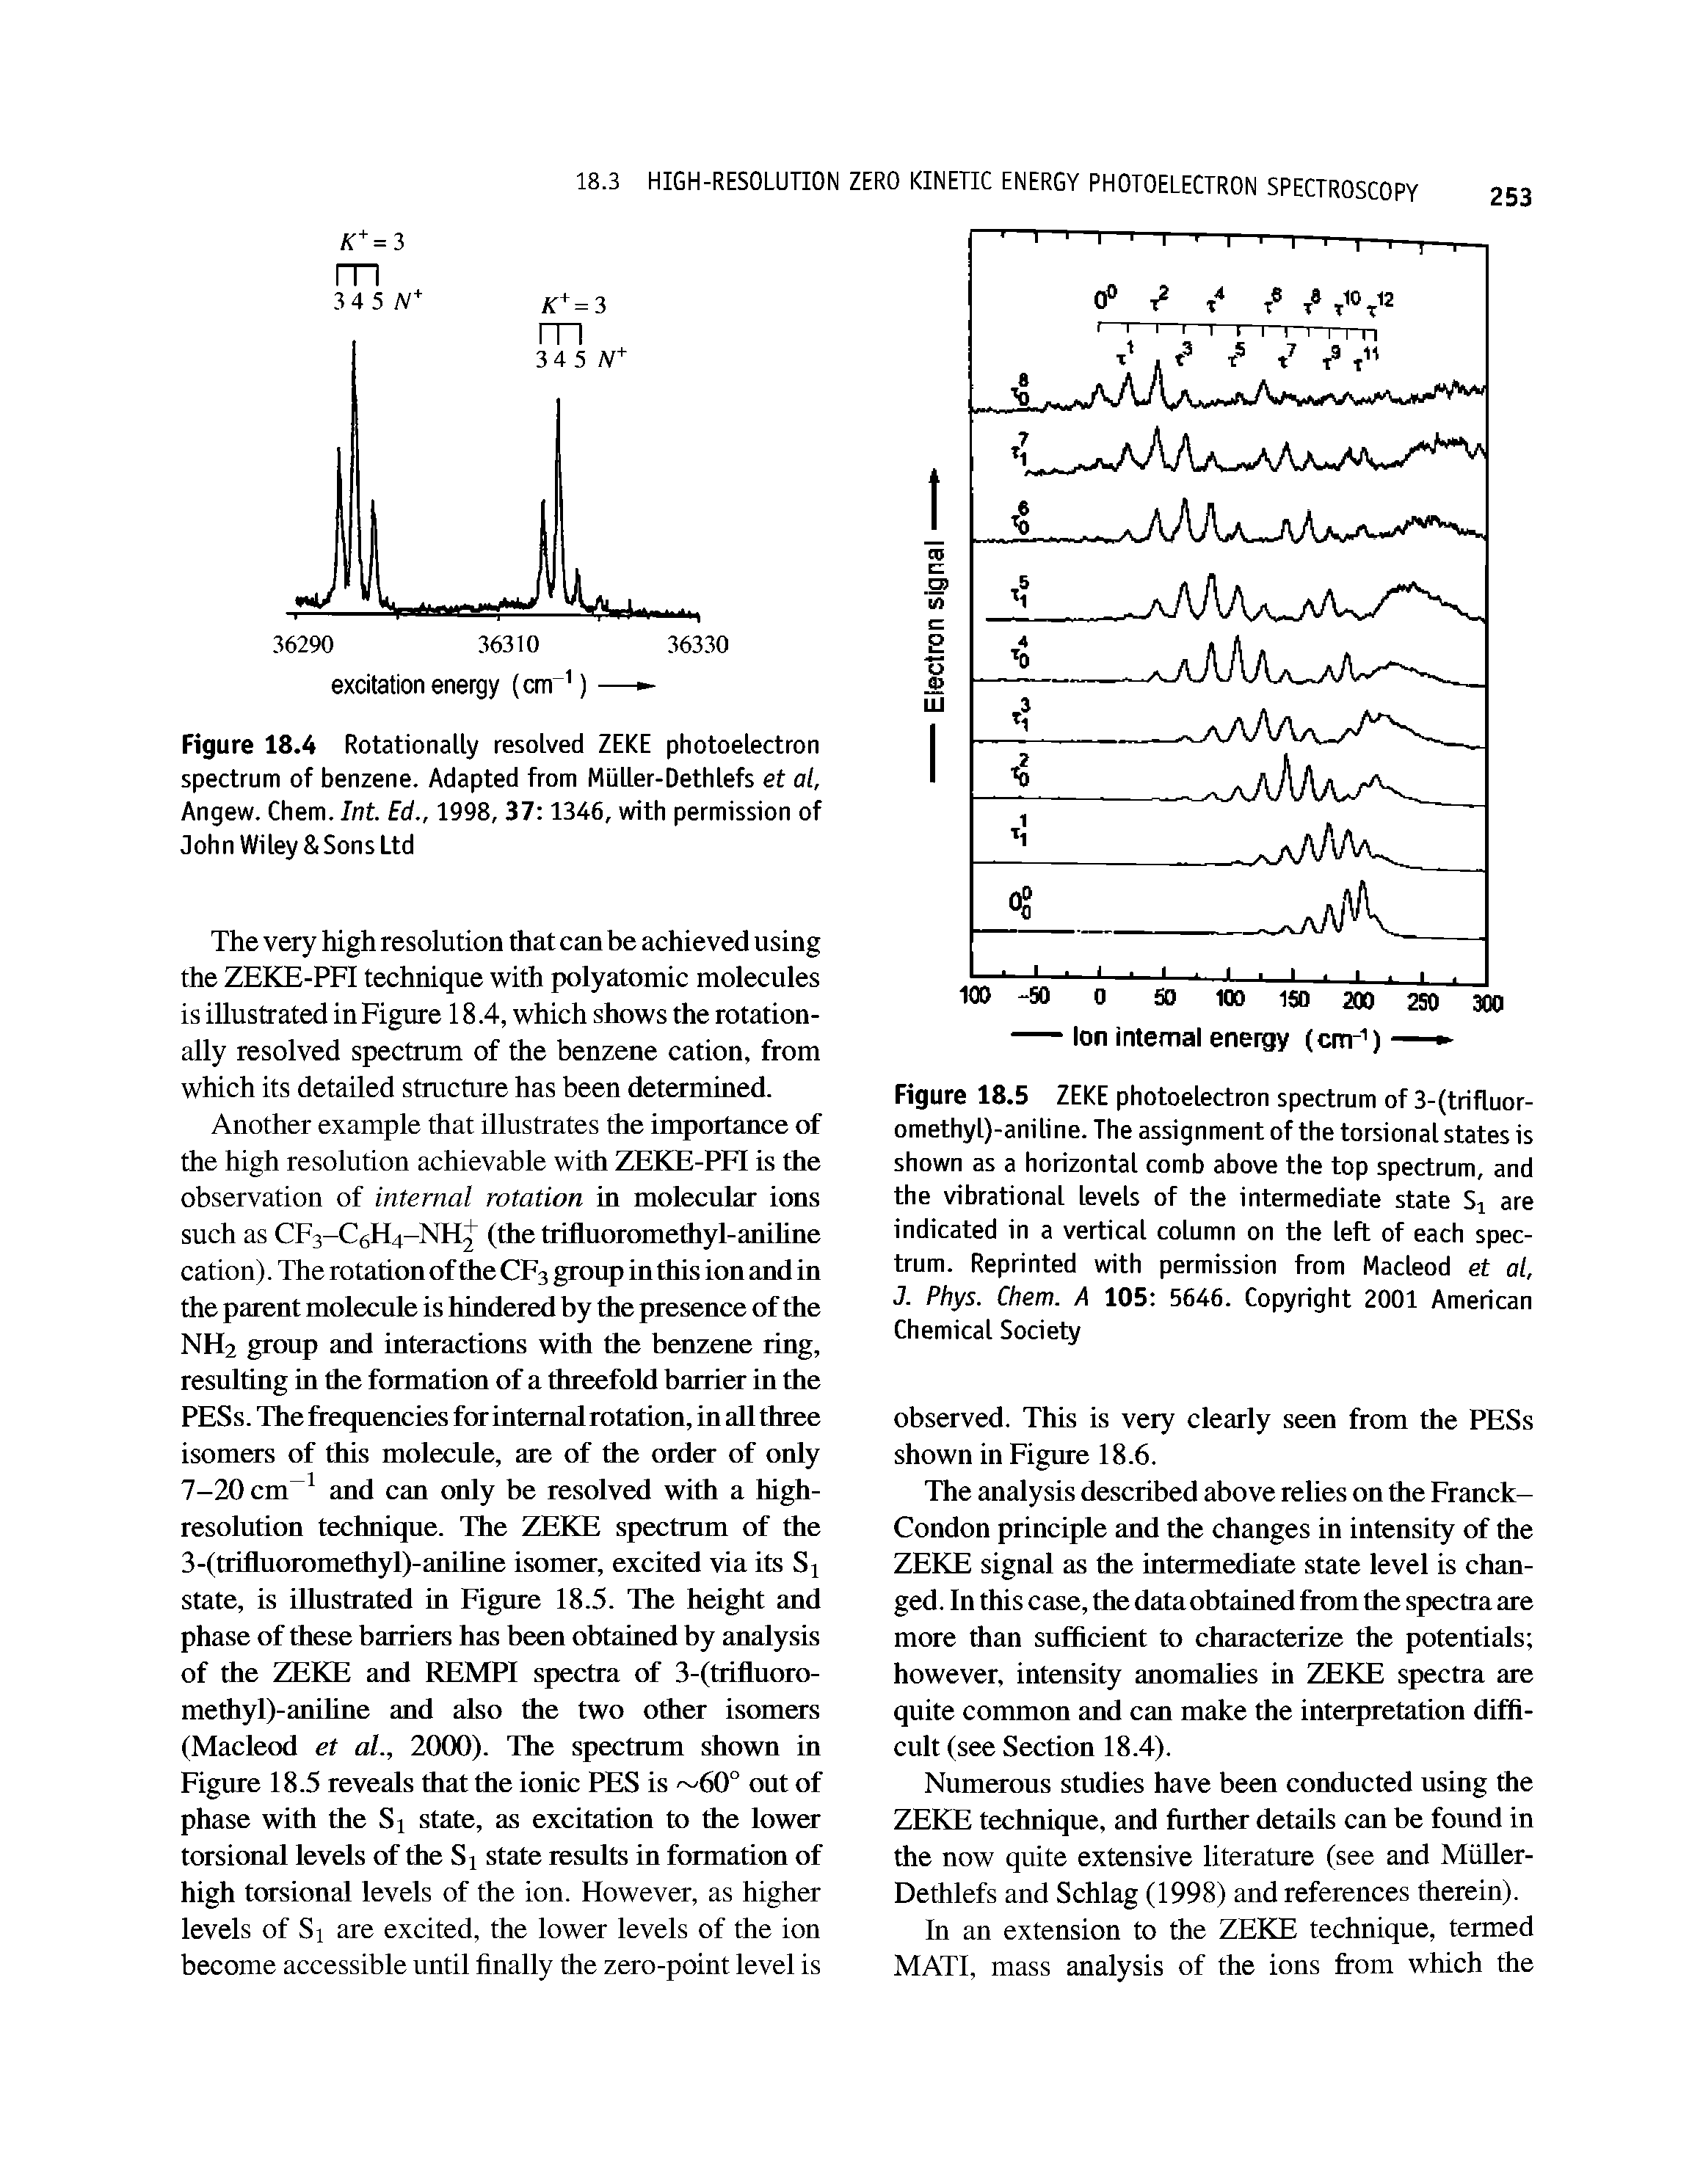 Figure 18.4 Rotationally resolved ZEKE photoelectron spectrum of benzene. Adapted from Muller-Dethlefs et al, Angew. Chem. Int. Ed., 1998, 37 1346, with permission of John Wiley Sons Ltd...